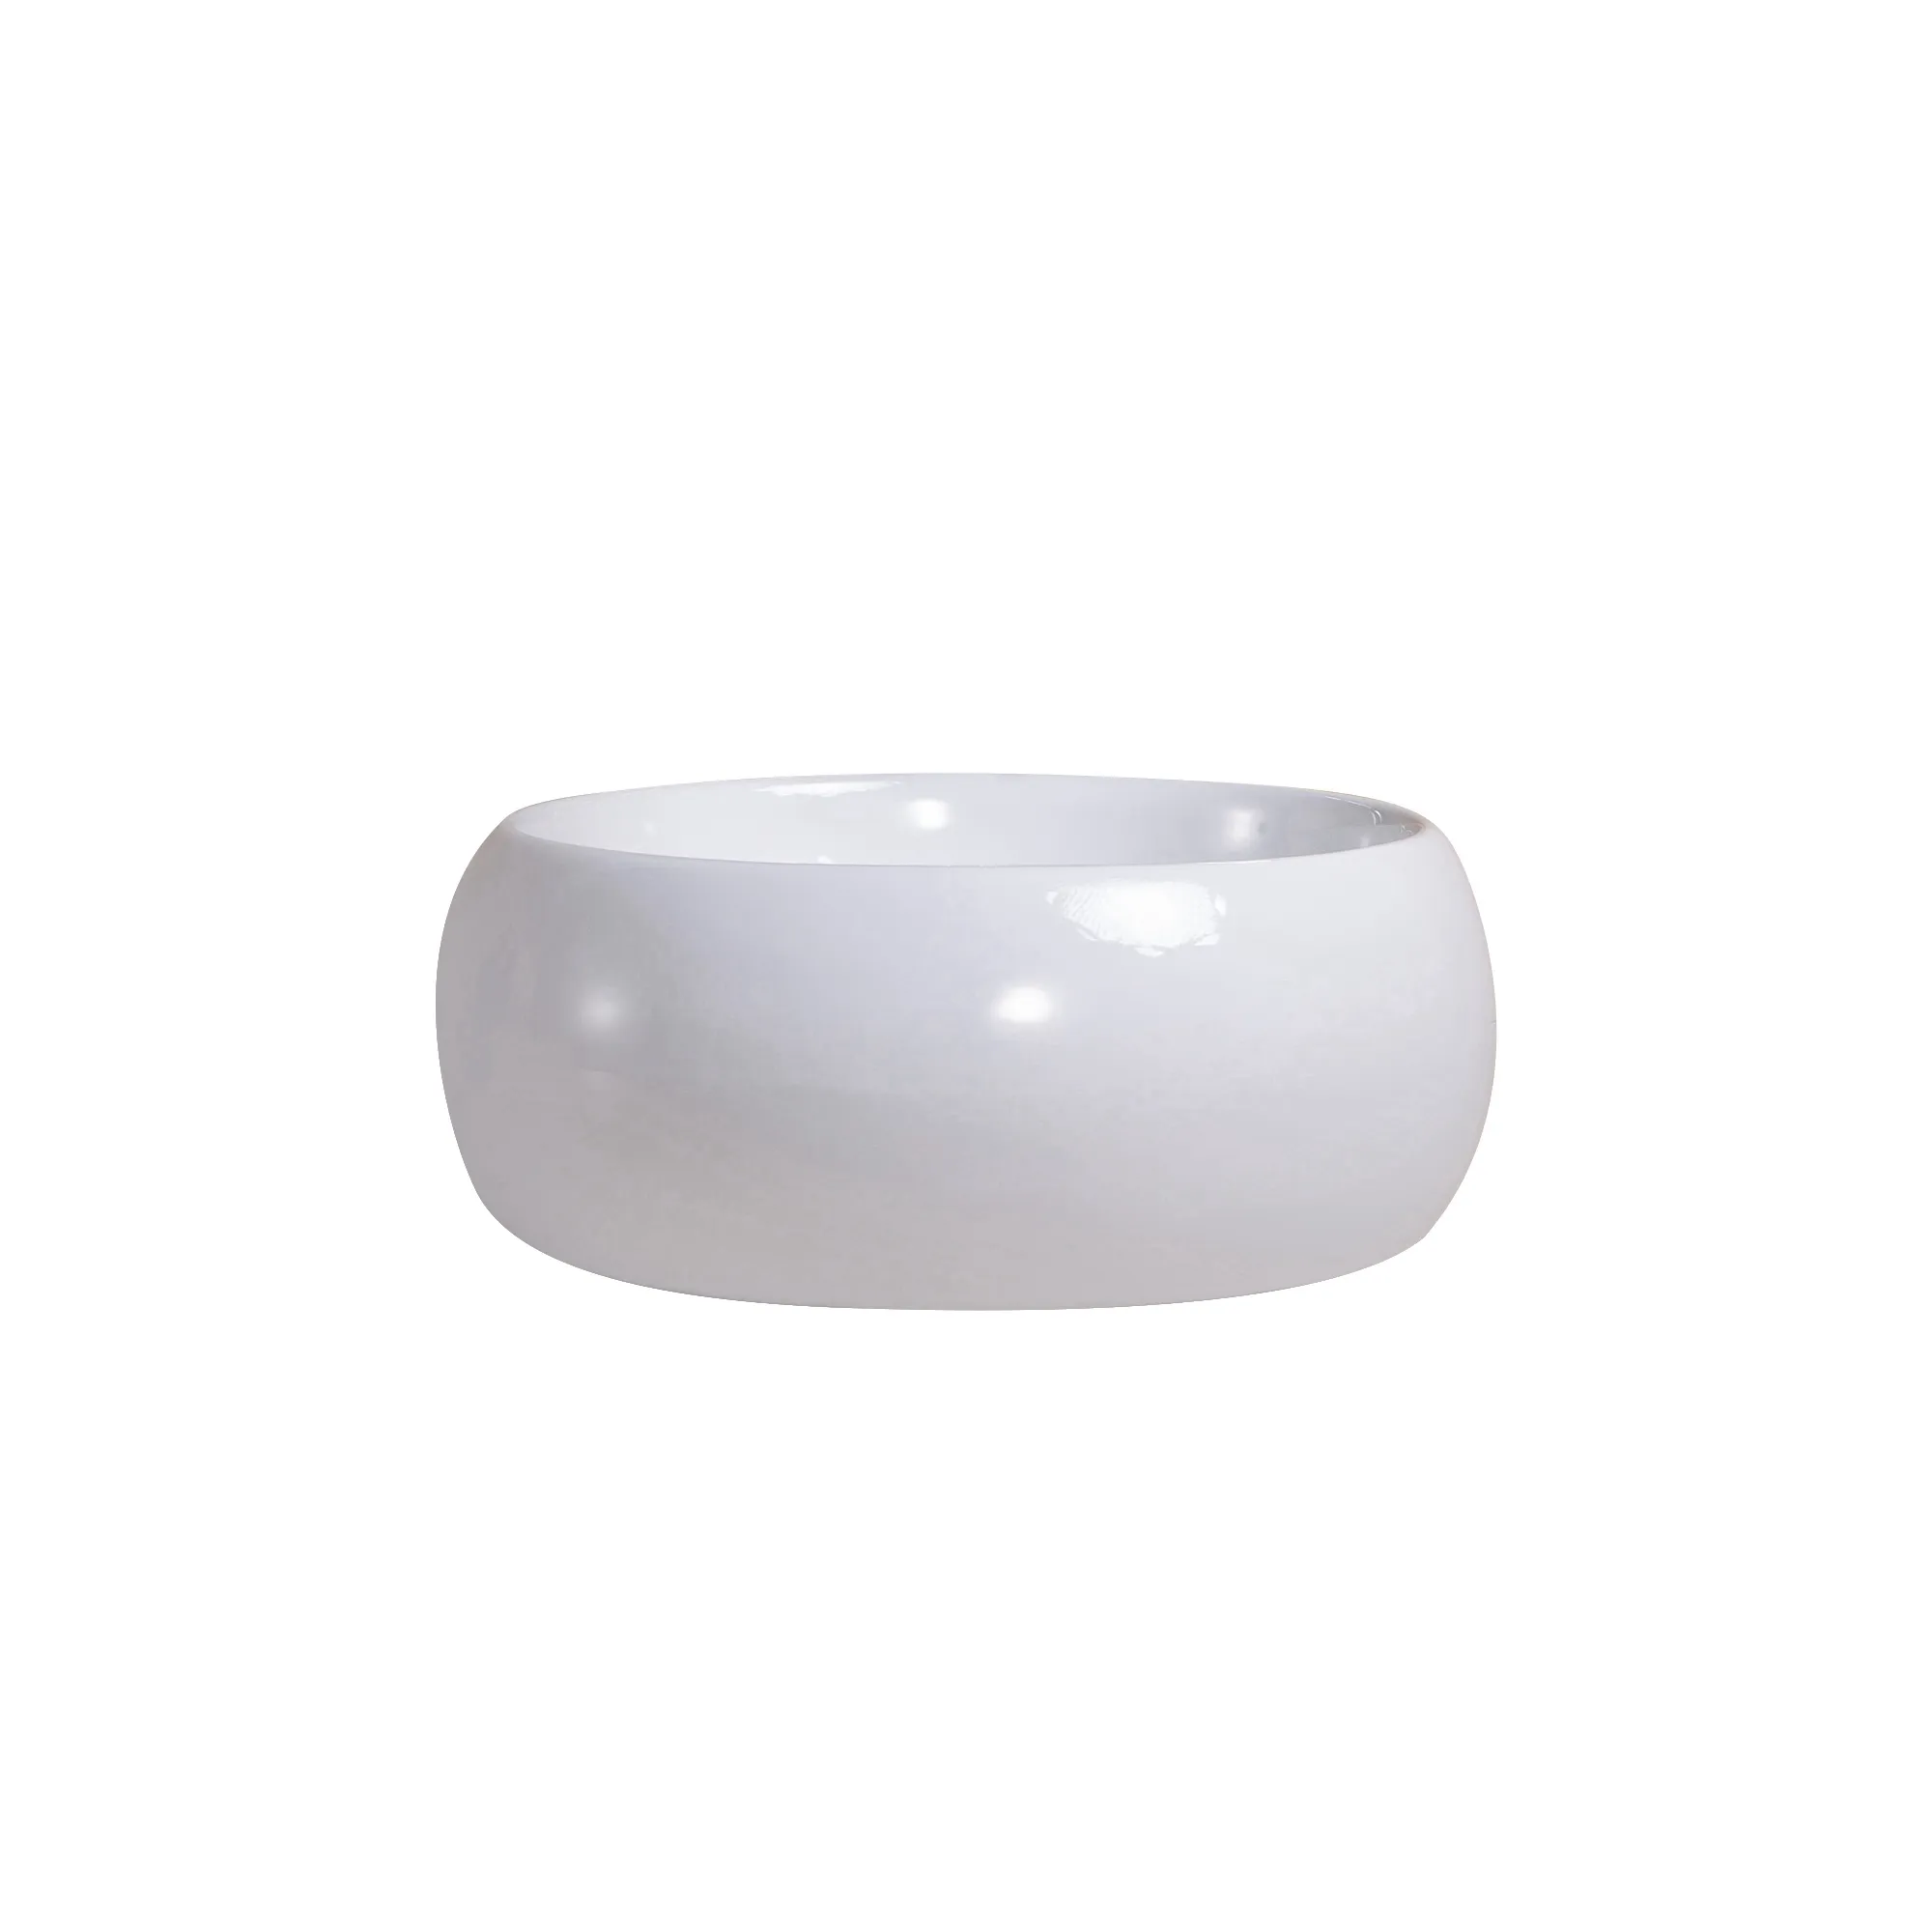 Bathroom White Ceramic Sink Counter Top Basin Sink Wash Basin on The Table Art Modern Round White Glossy Table Restaurant 9L